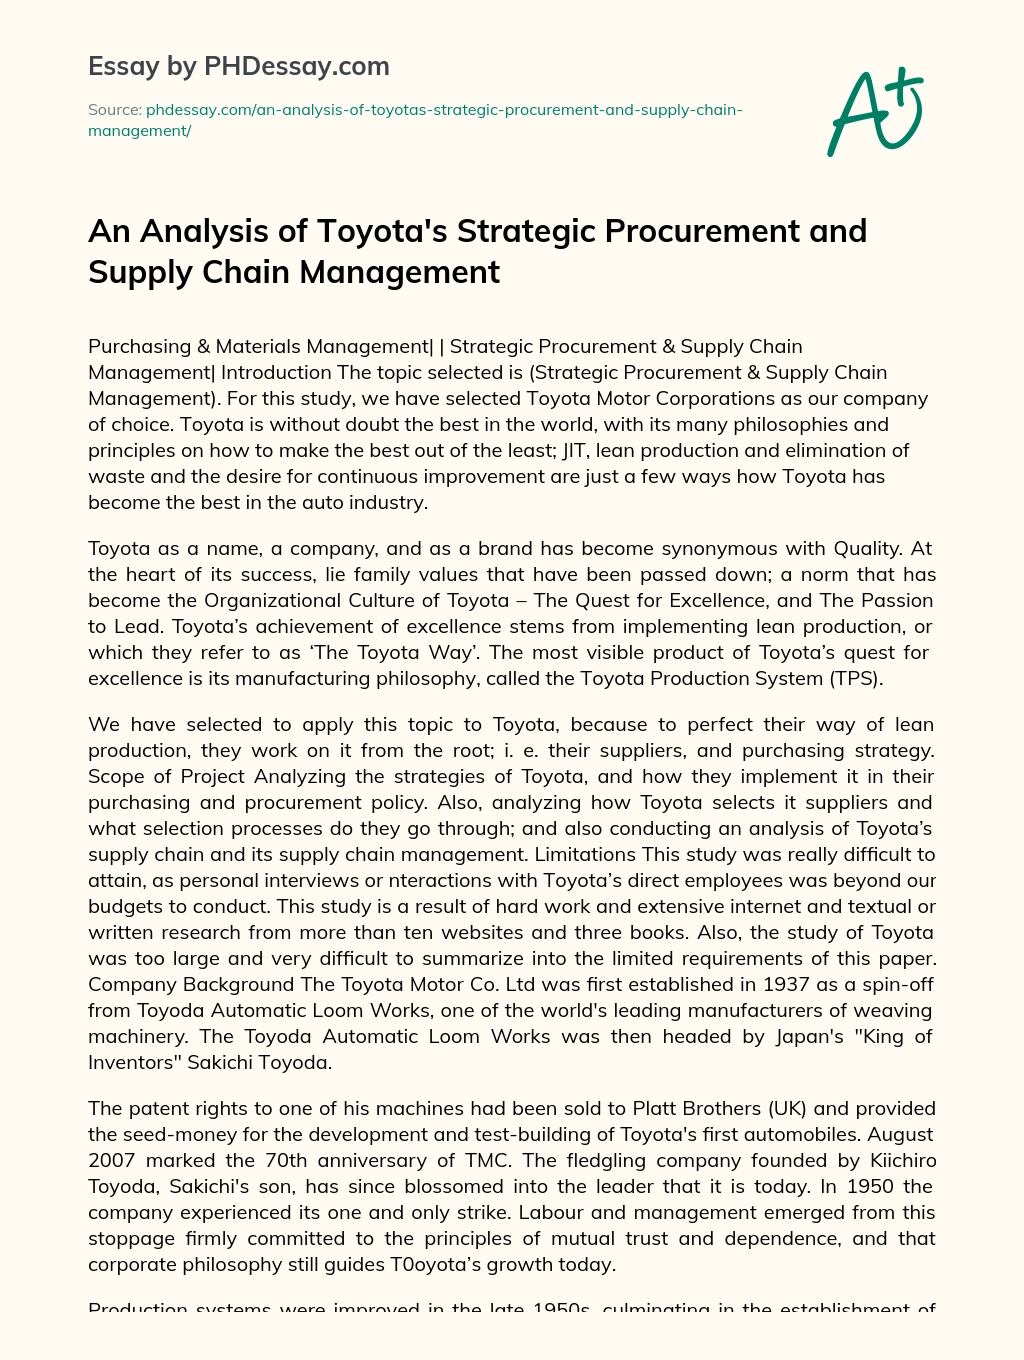 An Analysis of Toyota’s Strategic Procurement and Supply Chain Management essay